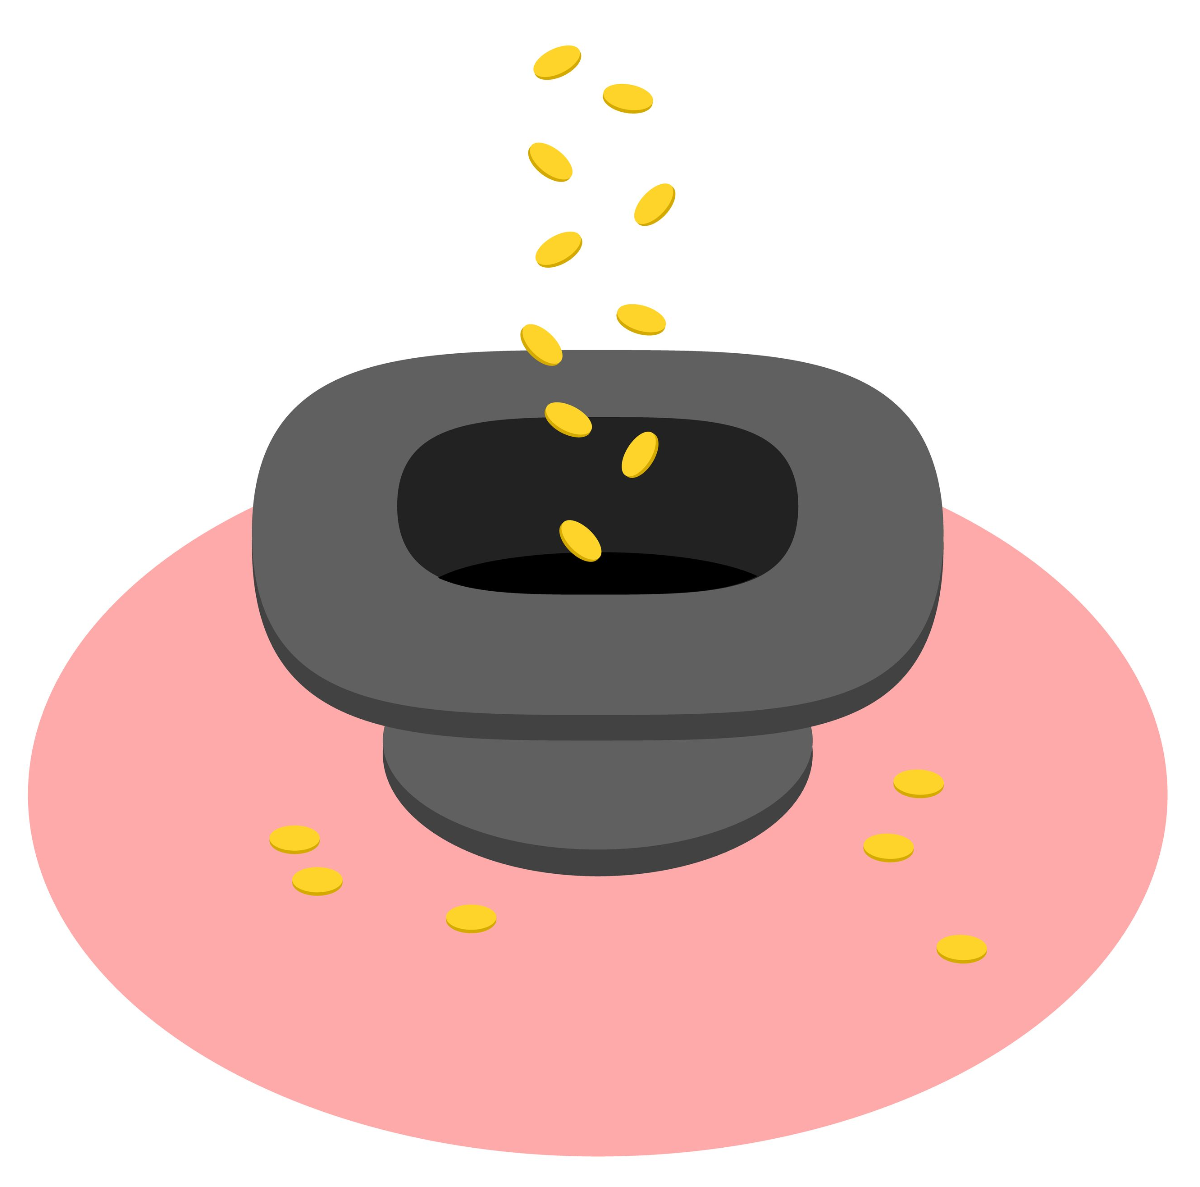 Illustration of coins dropping into an upside-down black top hat